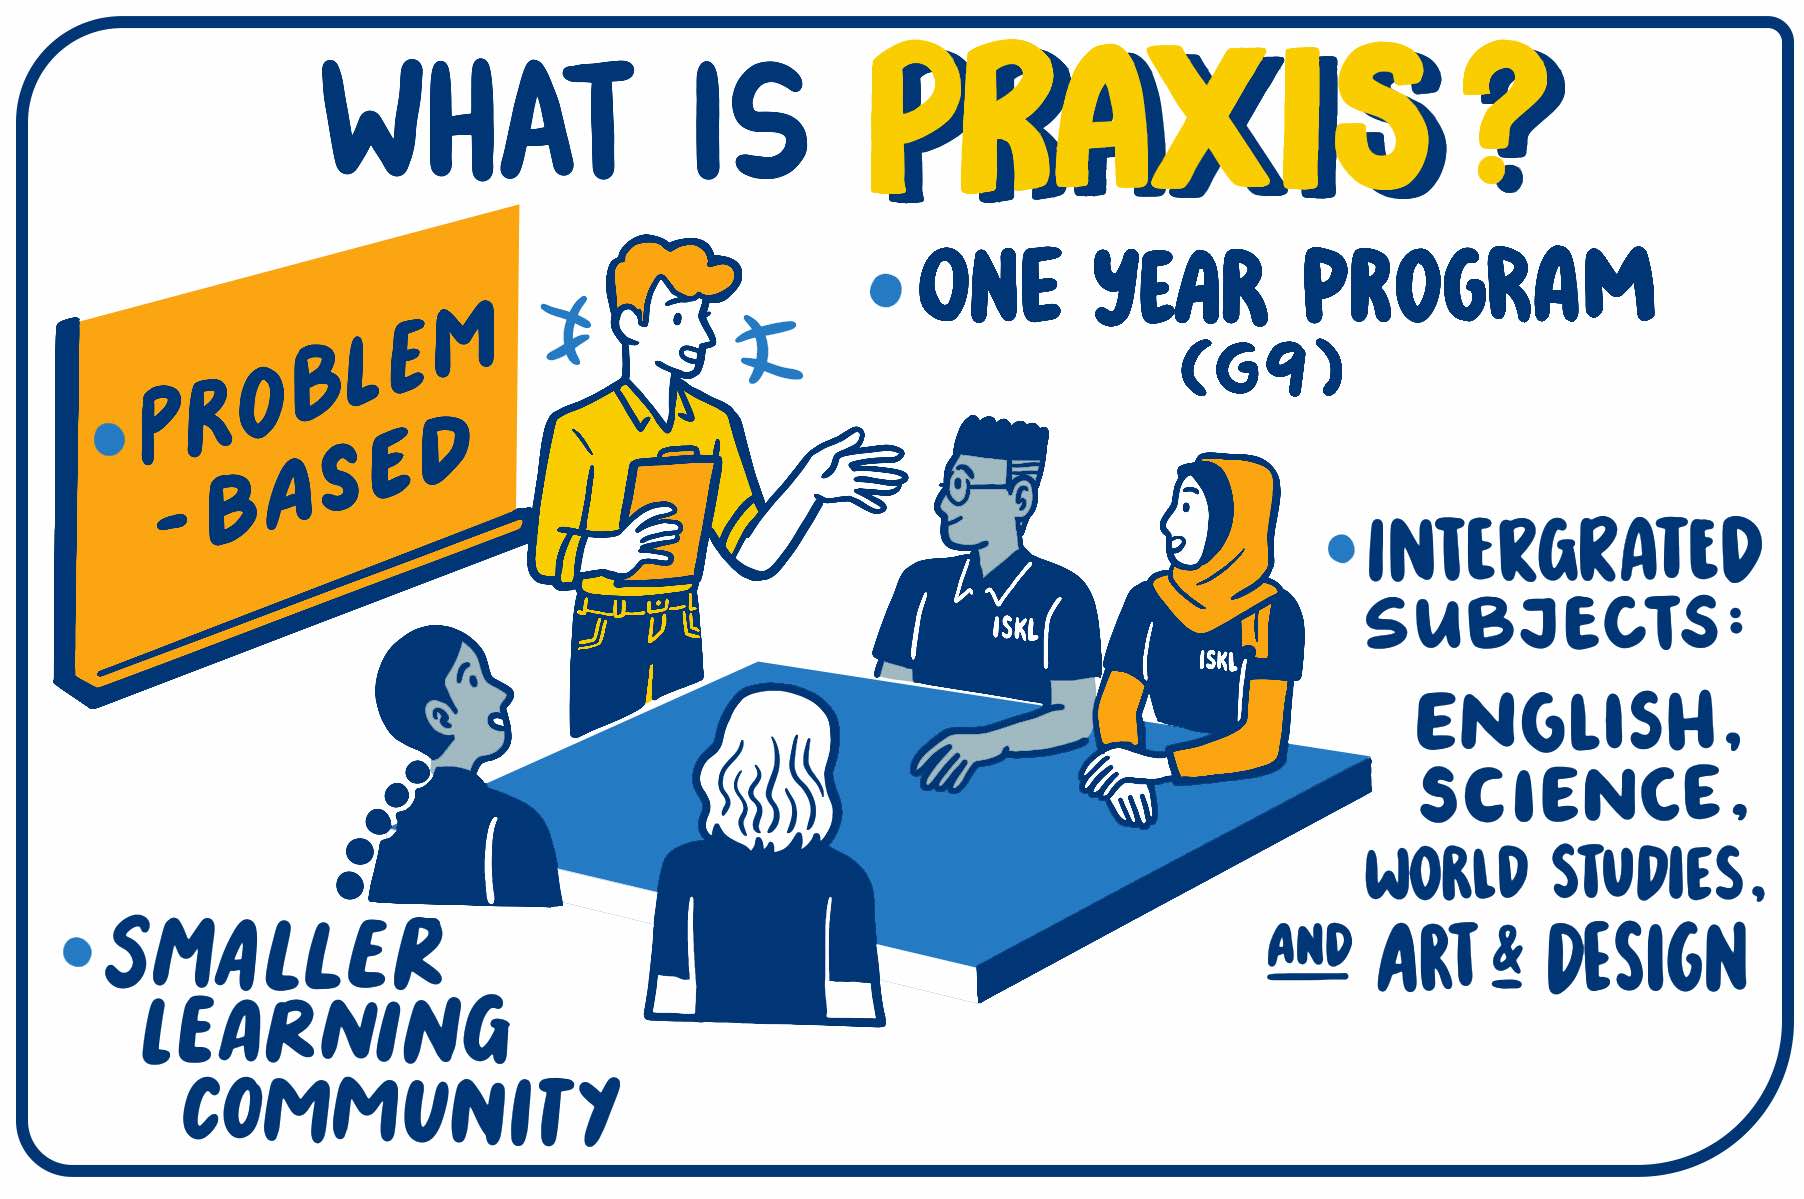 What is PRAXIS?